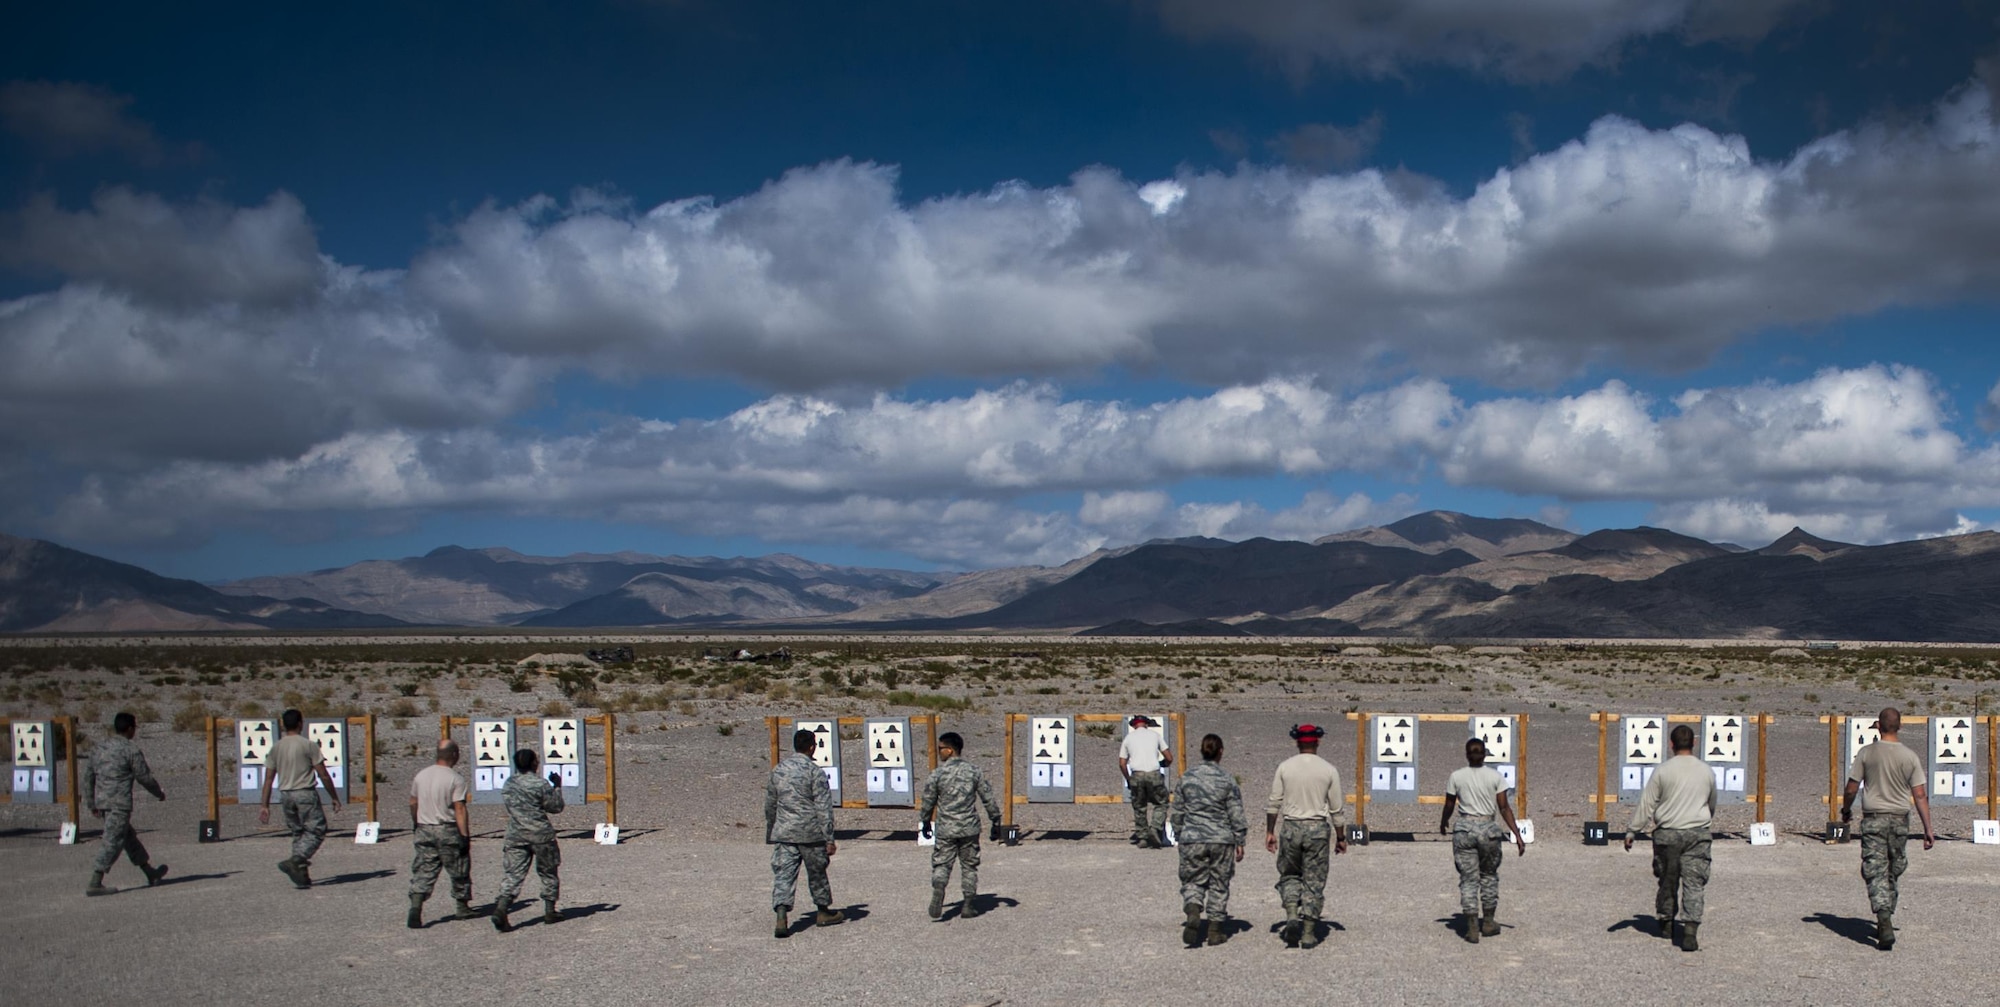 Airmen taking an M4 carbine Combat Arms Training and Maintenance class check their targets after a round of shooting on Nellis Air Force Base, Nev., Oct. 25, 2016. Once at the range, Airmen are given the opportunity to fire their weapon and familiarize themselves with the tools they will interact with daily while deployed. (U.S. Air Force photo by Airman 1st Class Kevin Tanenbaum/Released)